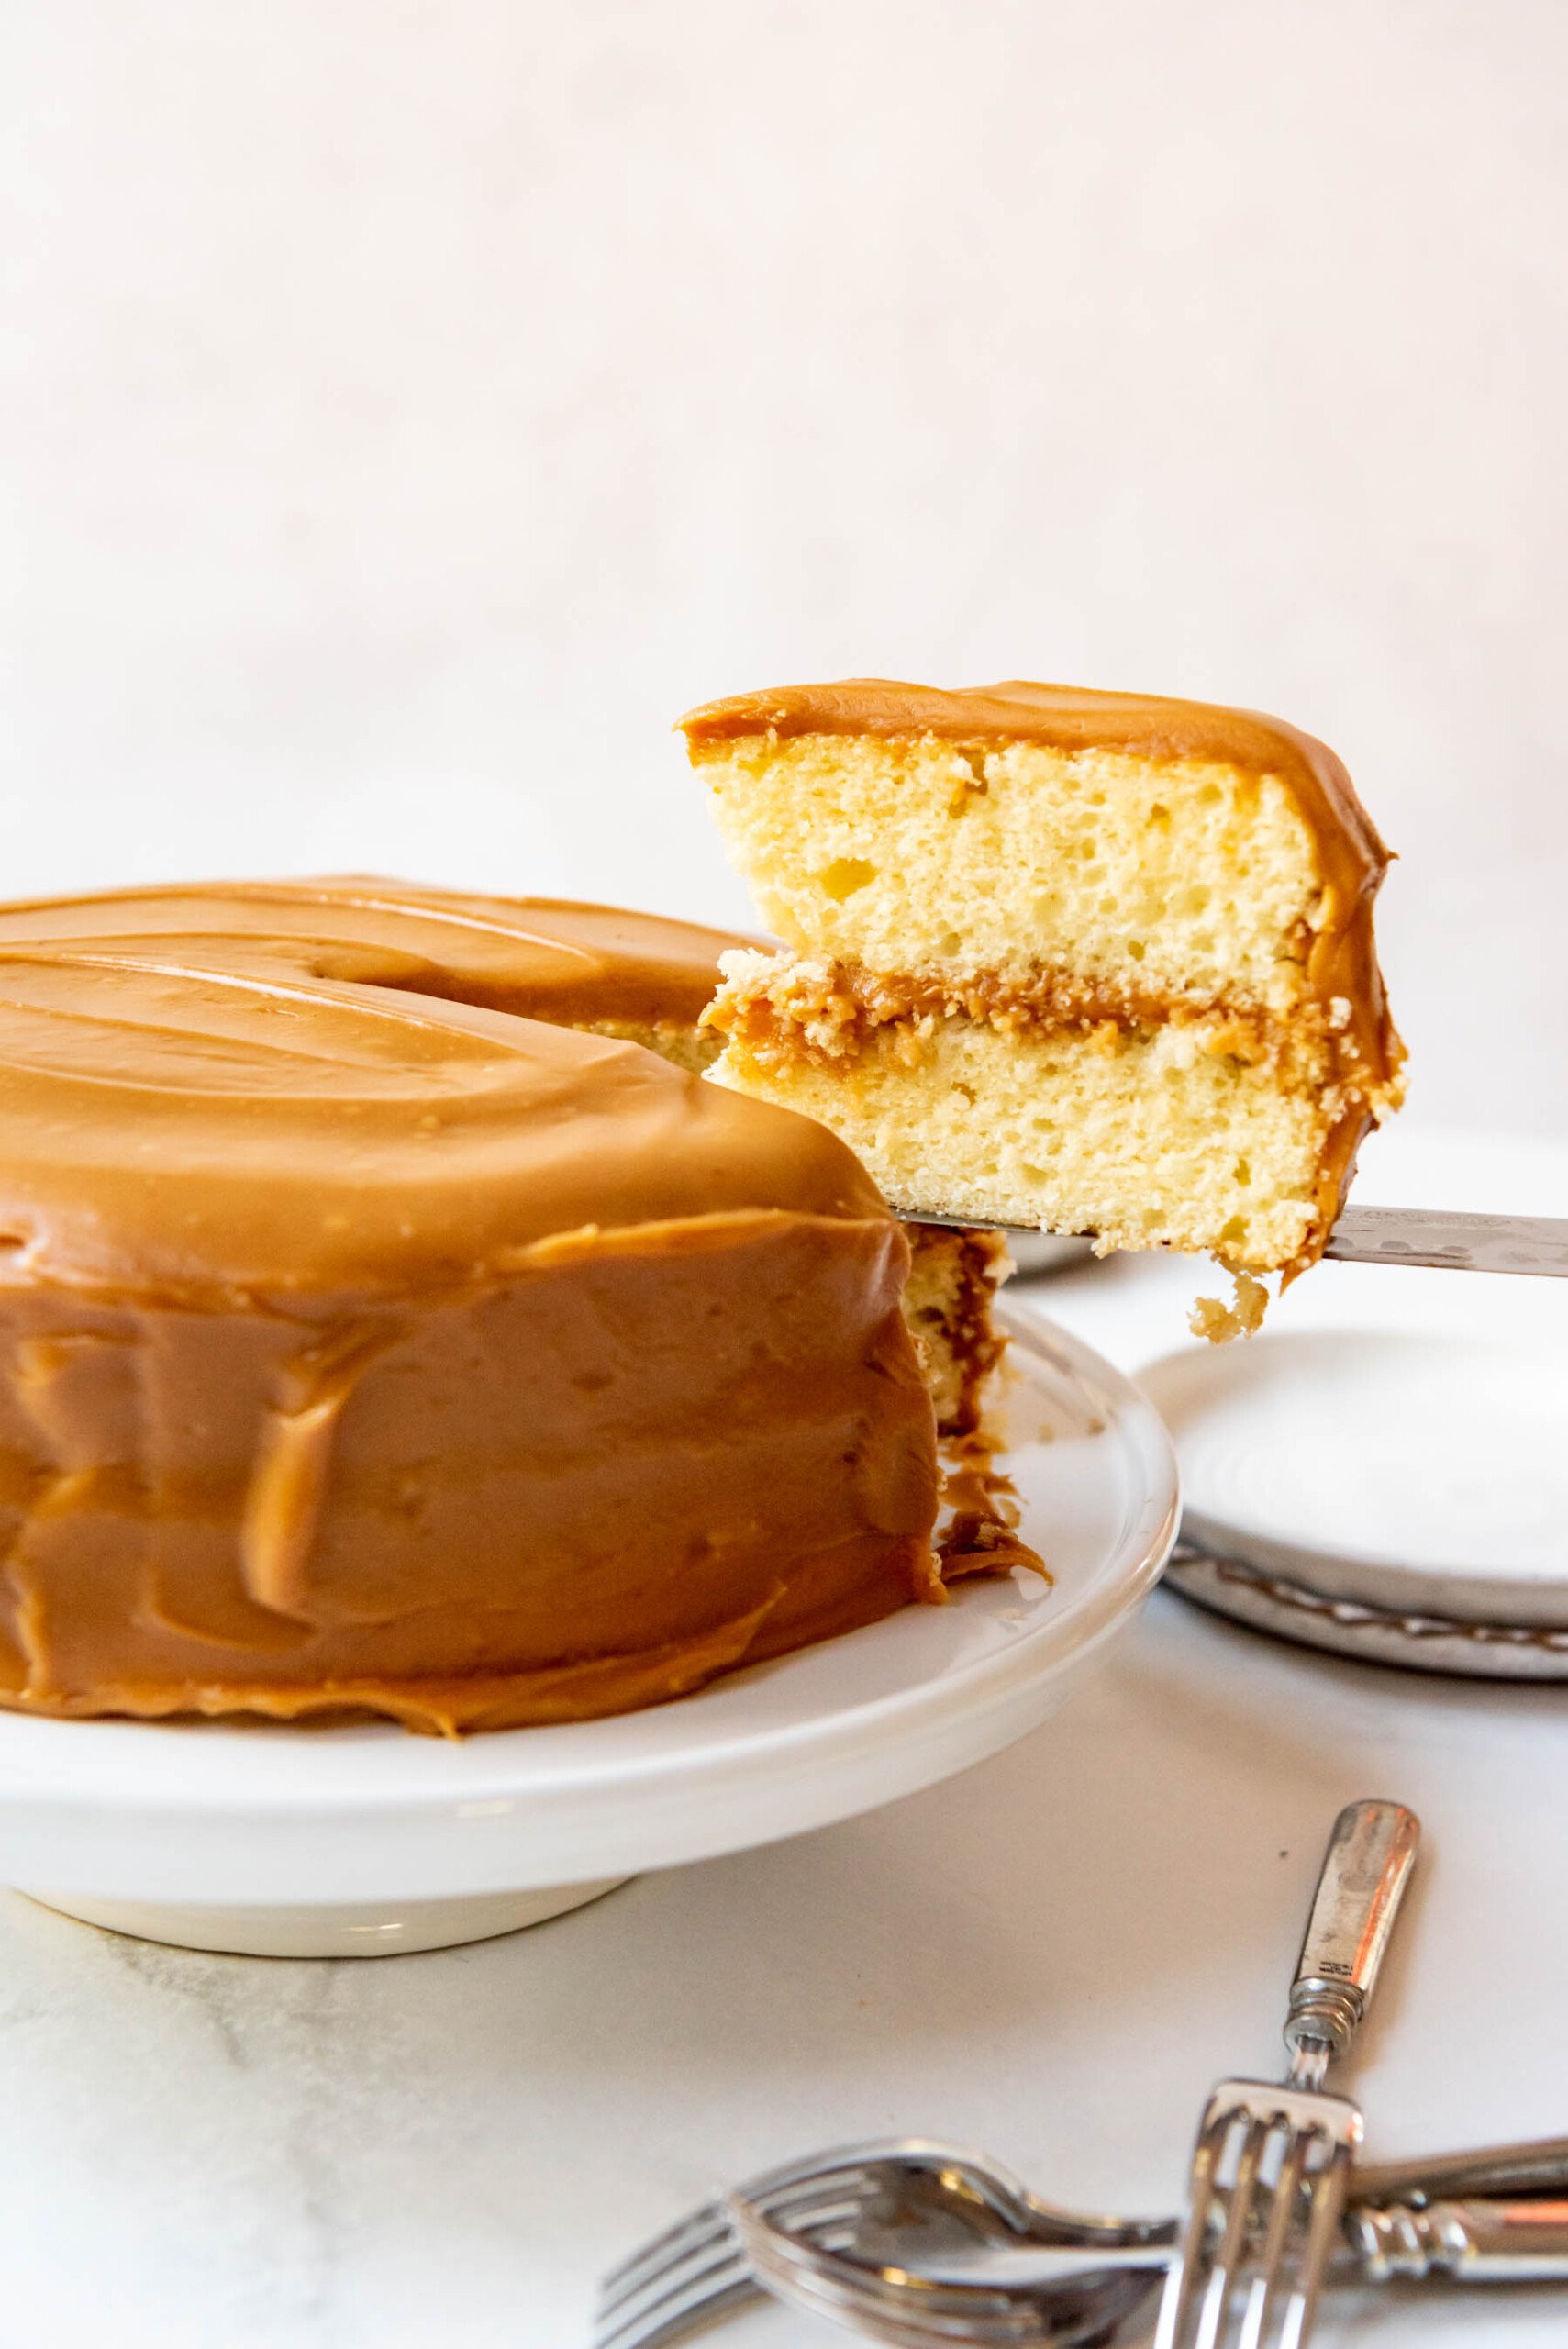 A slice of caramel cake being lifted from the cake plate.